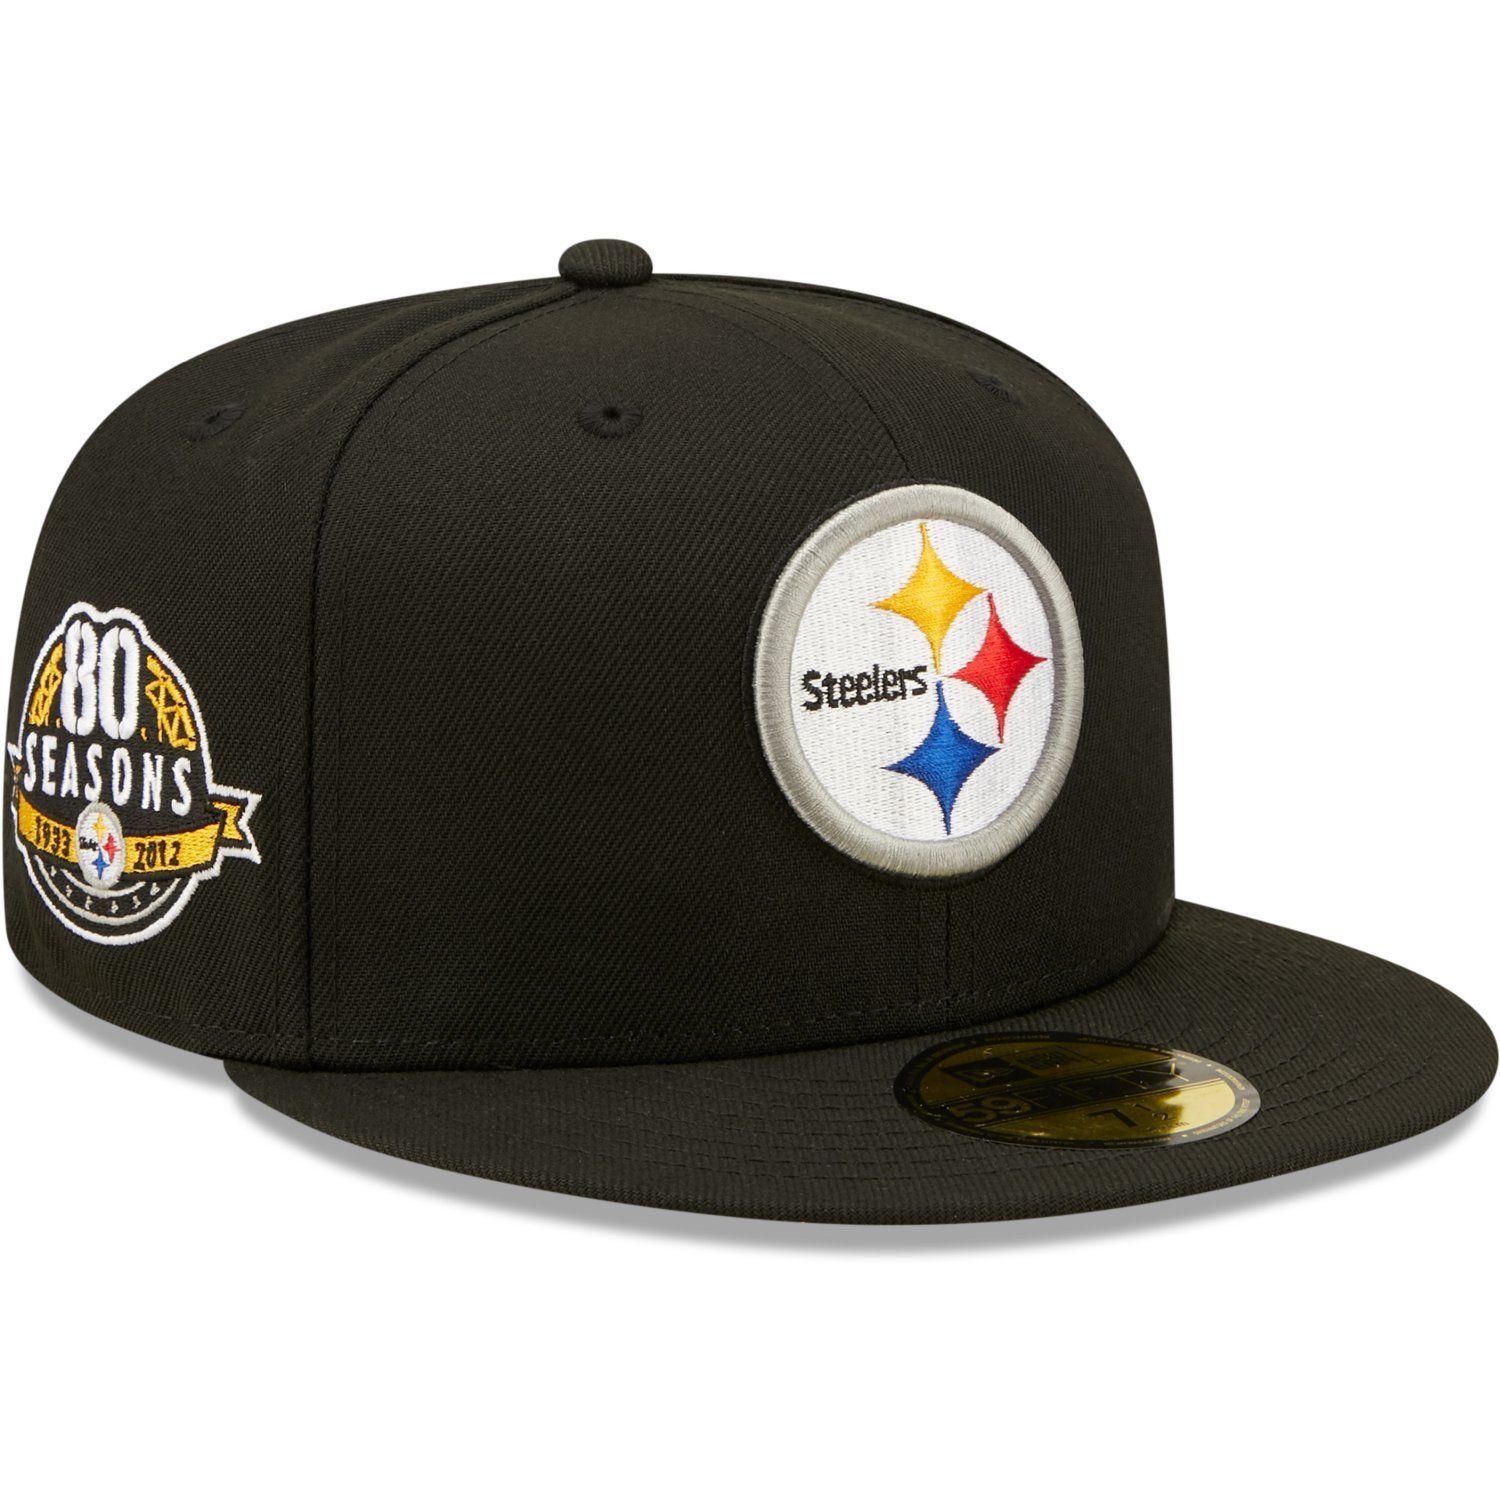 New Era Fitted 80 Seasons Steelers Pittsburgh 59Fifty Cap